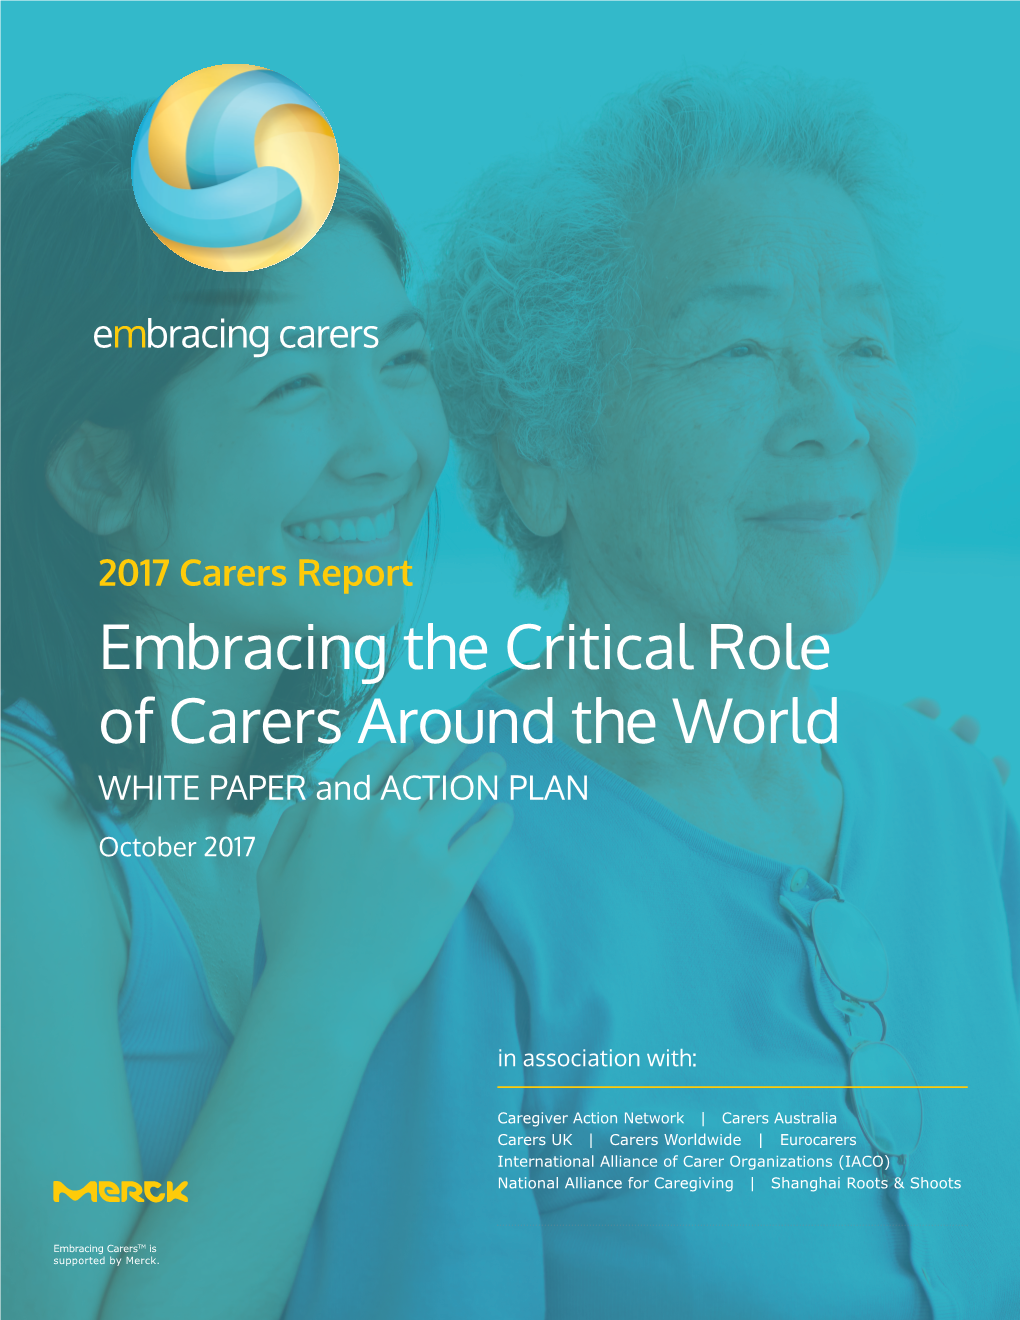 Embracing the Critical Role of Carers Around the World WHITE PAPER and ACTION PLAN